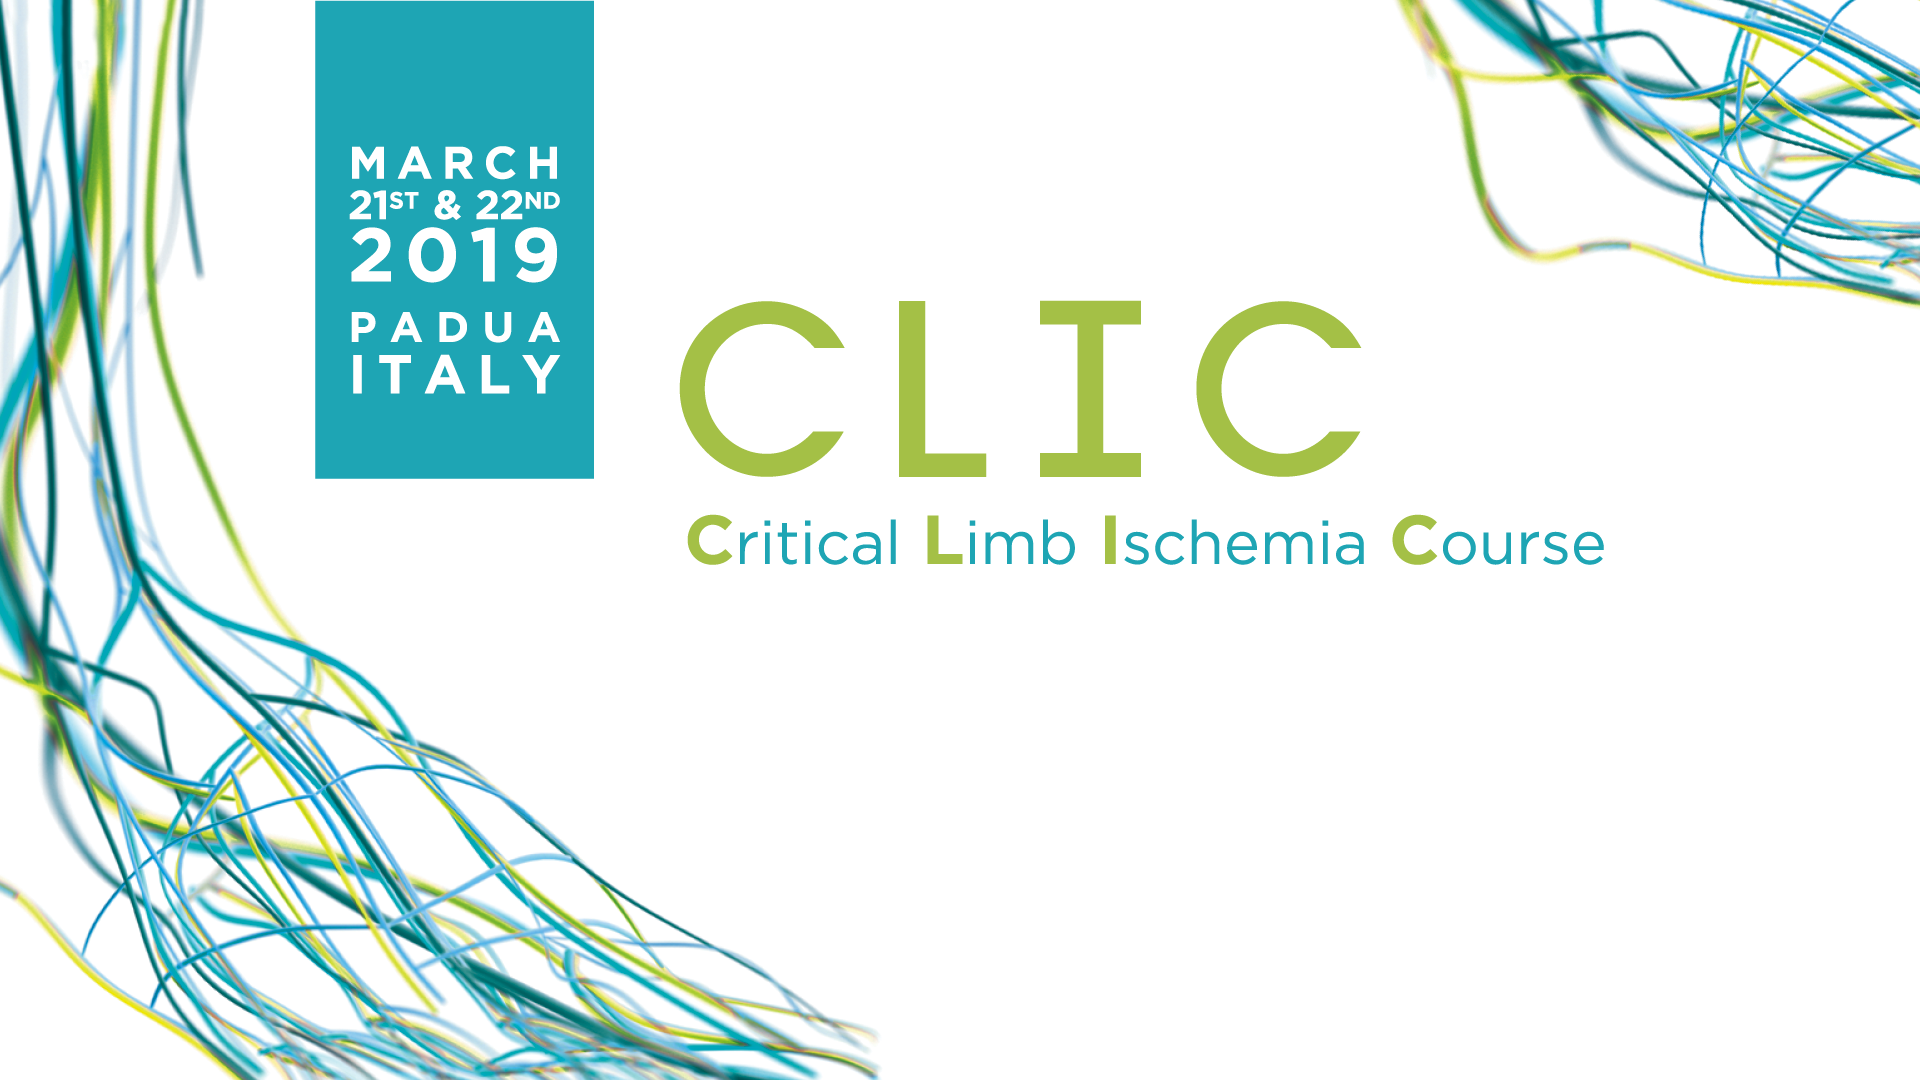 CLIC 2019 SESSION I: CHALLENGING PATIENTS